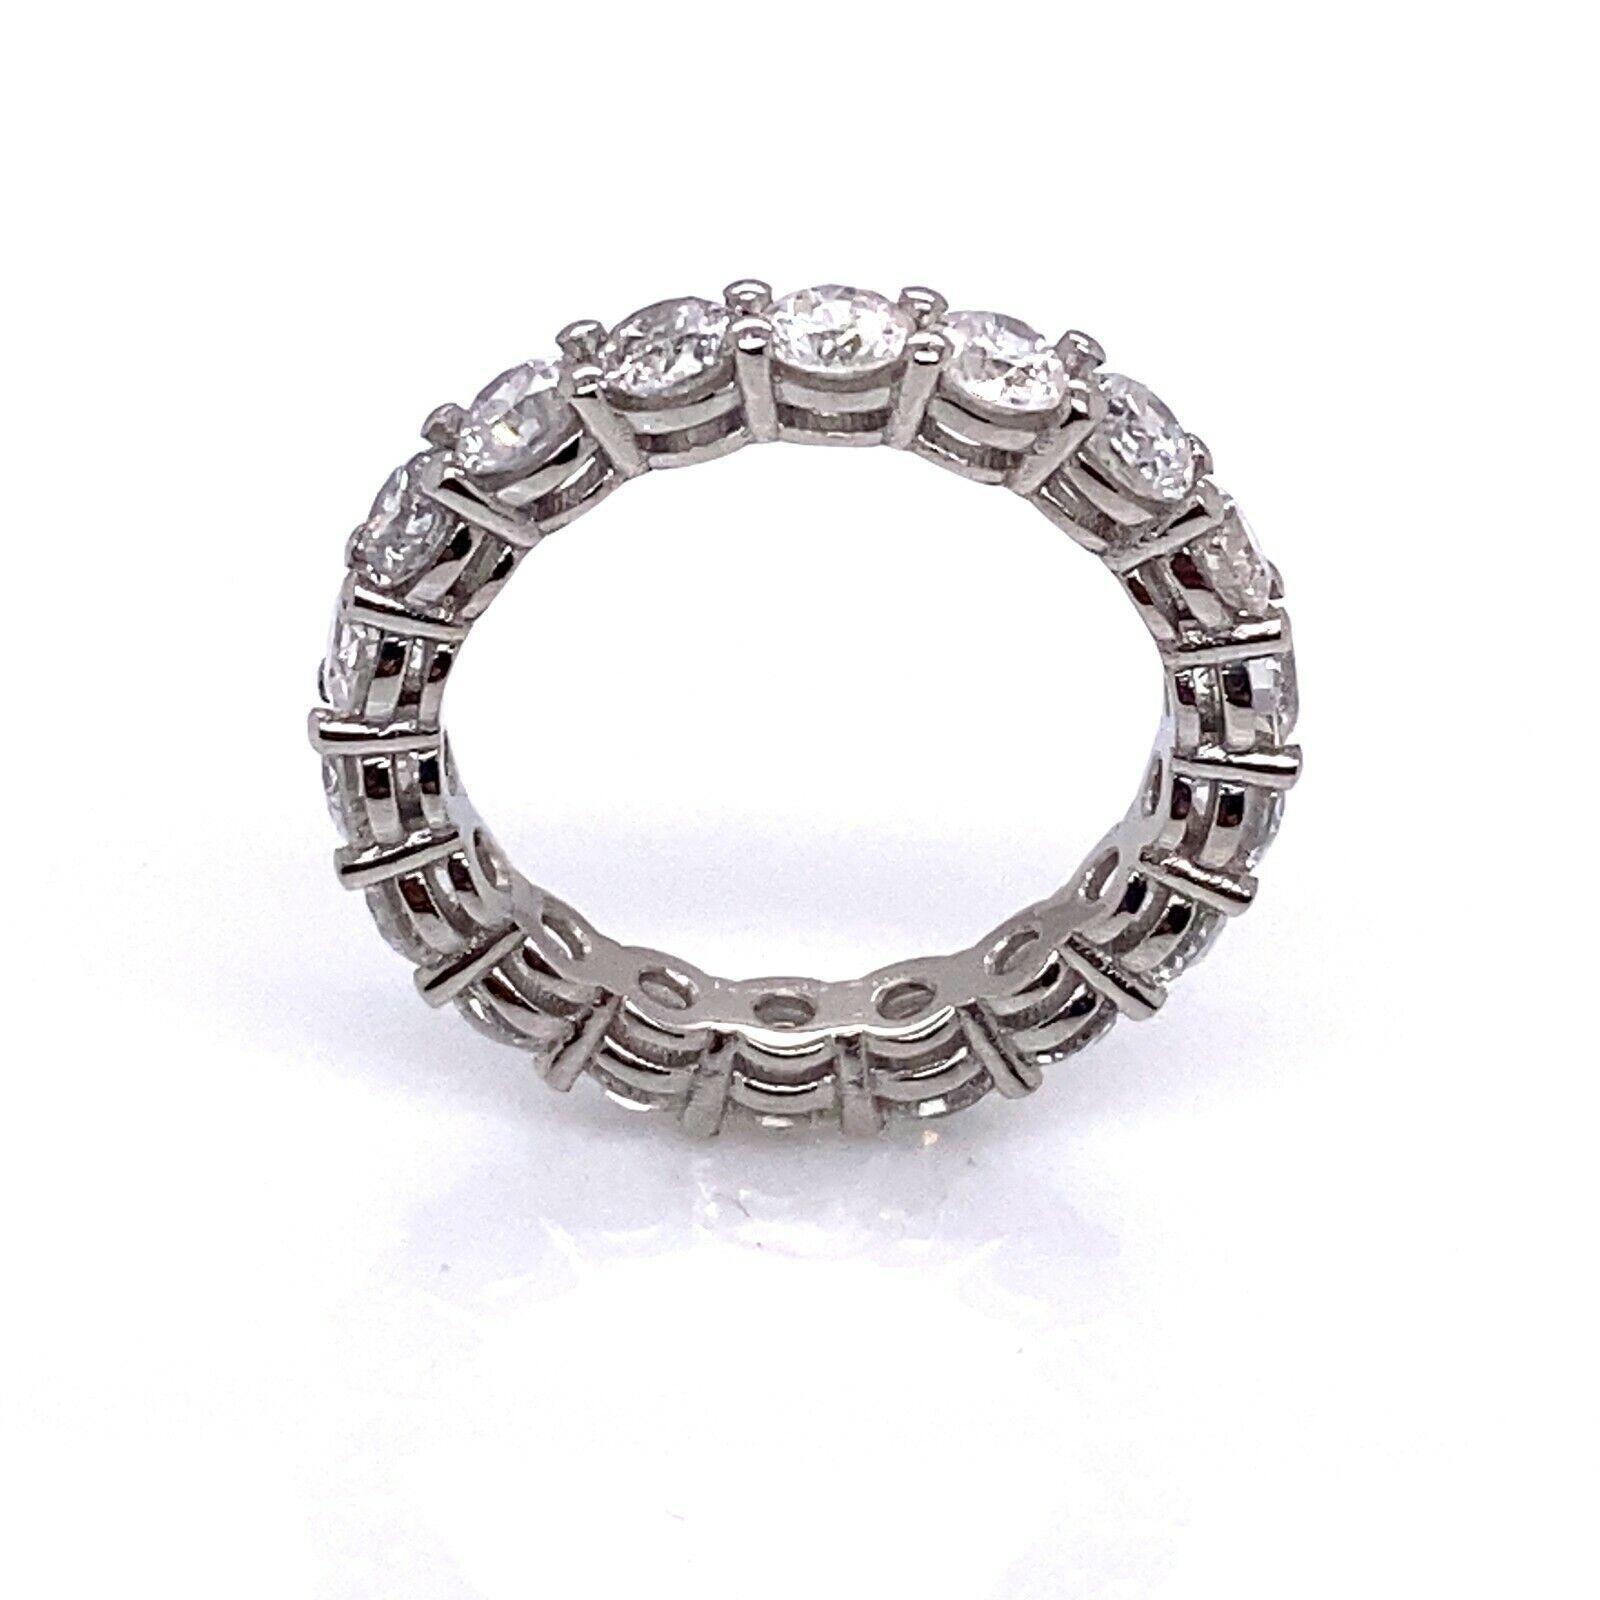 New Platinum Full Eternity Band Ring, Set With 3.0ct Of Round DiamondsMade by Jewellery Cave

Additional Information:
Total Diamond Weight: 3.0ct 
Diamond Colour: G/H
Diamond Clarity: SI2/3
Total  Weight: 5.4g
Ring Size: N
Width of Band: